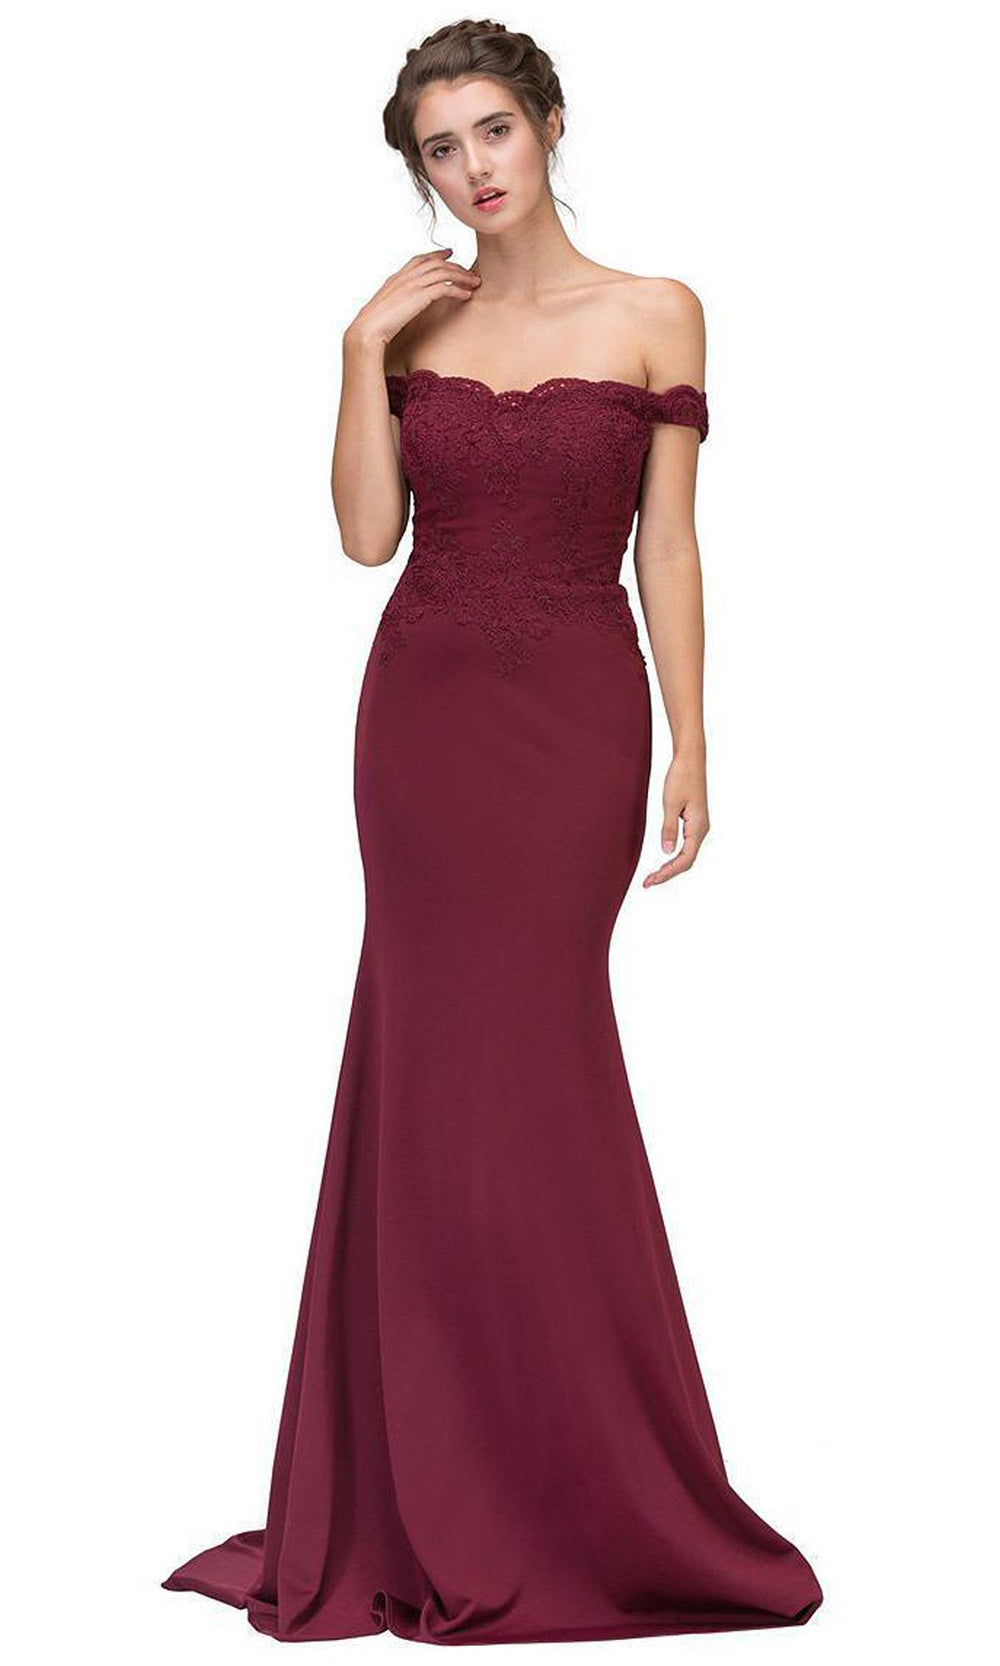 Eureka Fashion - Off Shoulder Lace Appliqued Jersey Mermaid Gown 7100 - 1 pc Burgundy In Size S Available CCSALE L / Burgundy